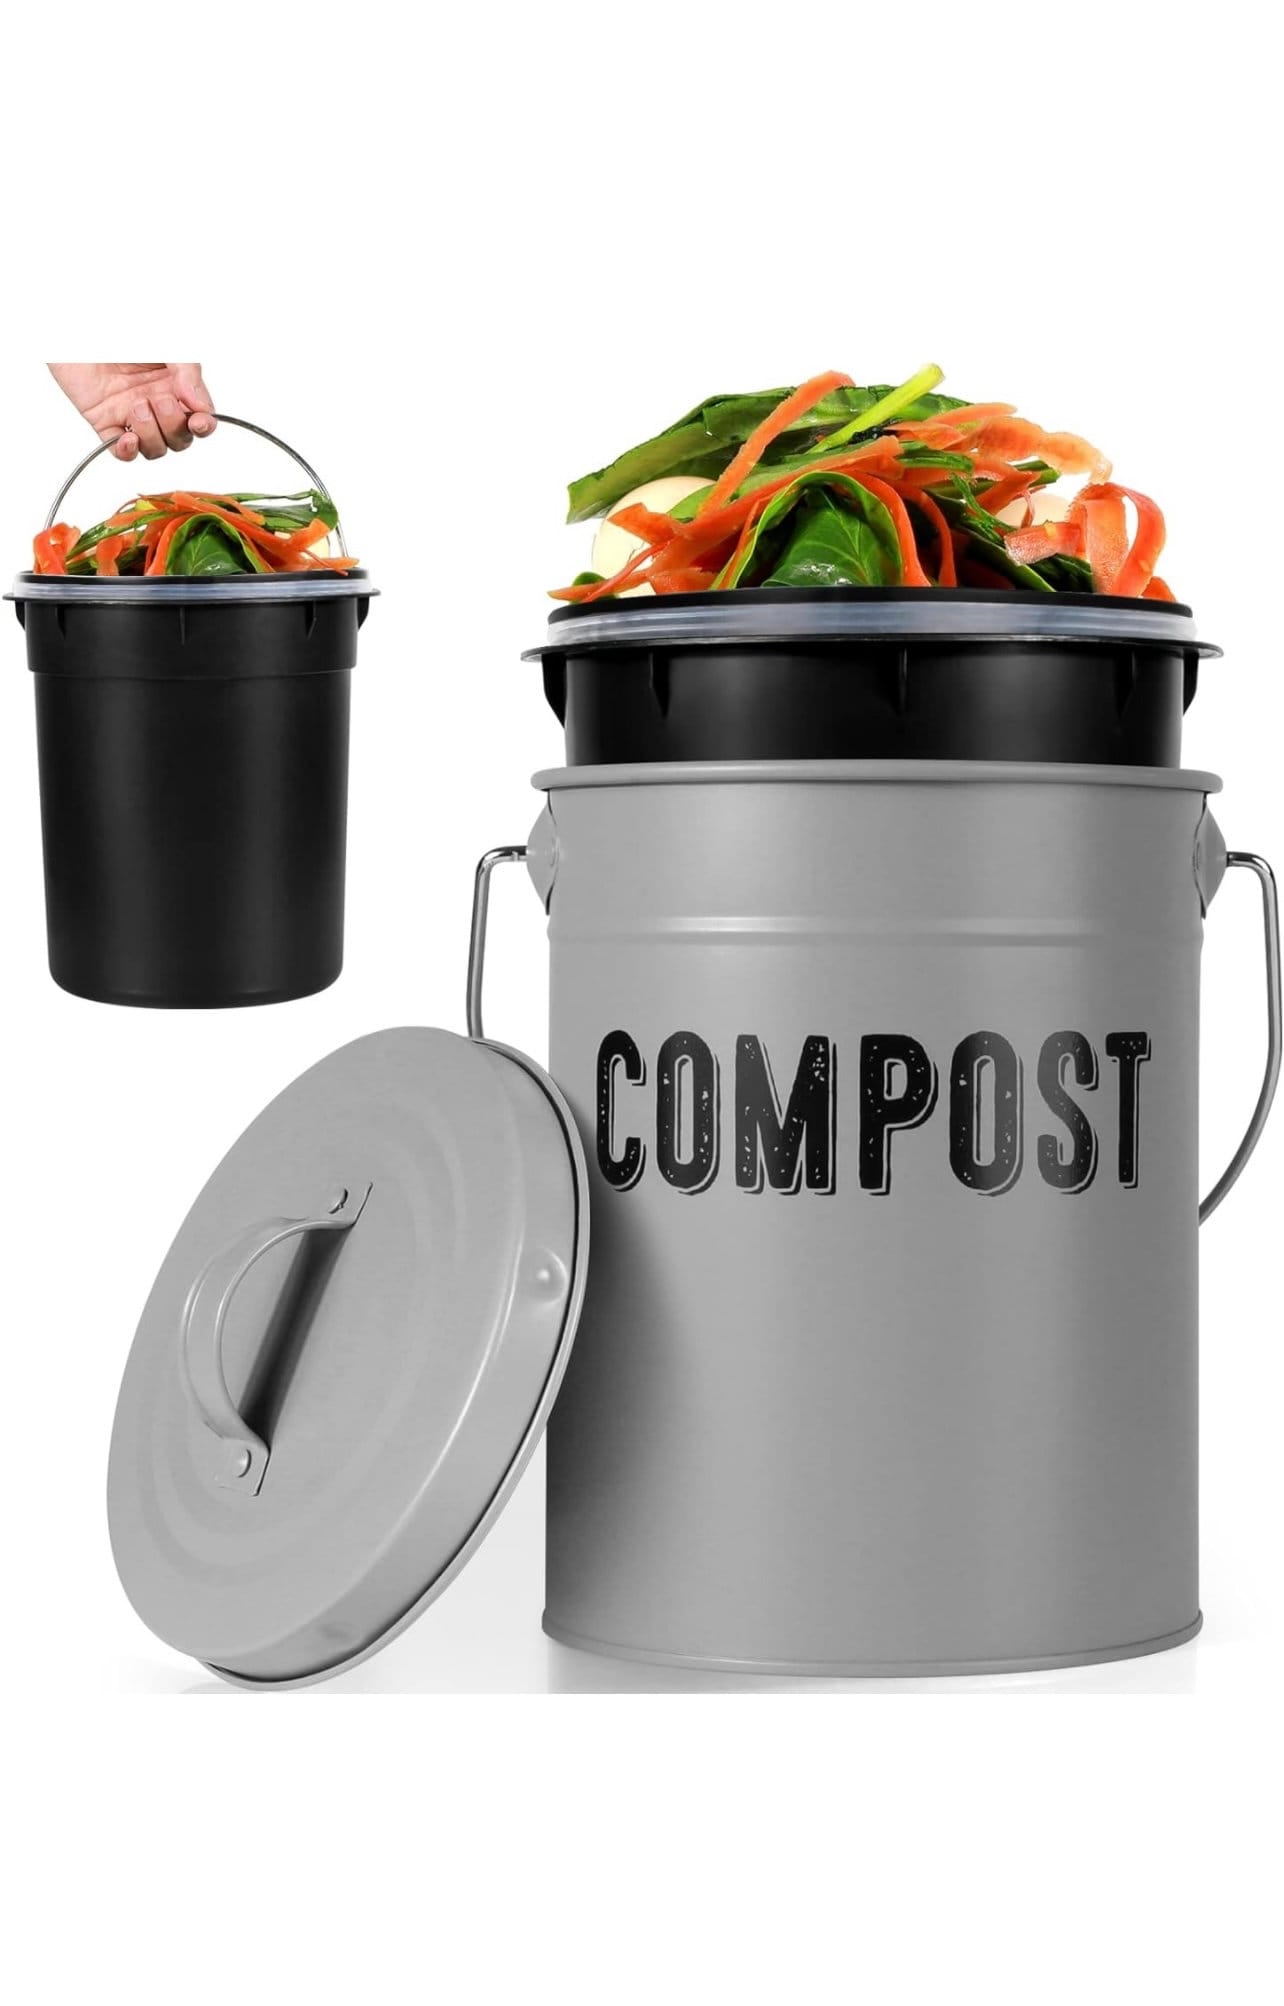 Natural Home 1.3 Gal. Stainless Steel Compost Bin - Silver